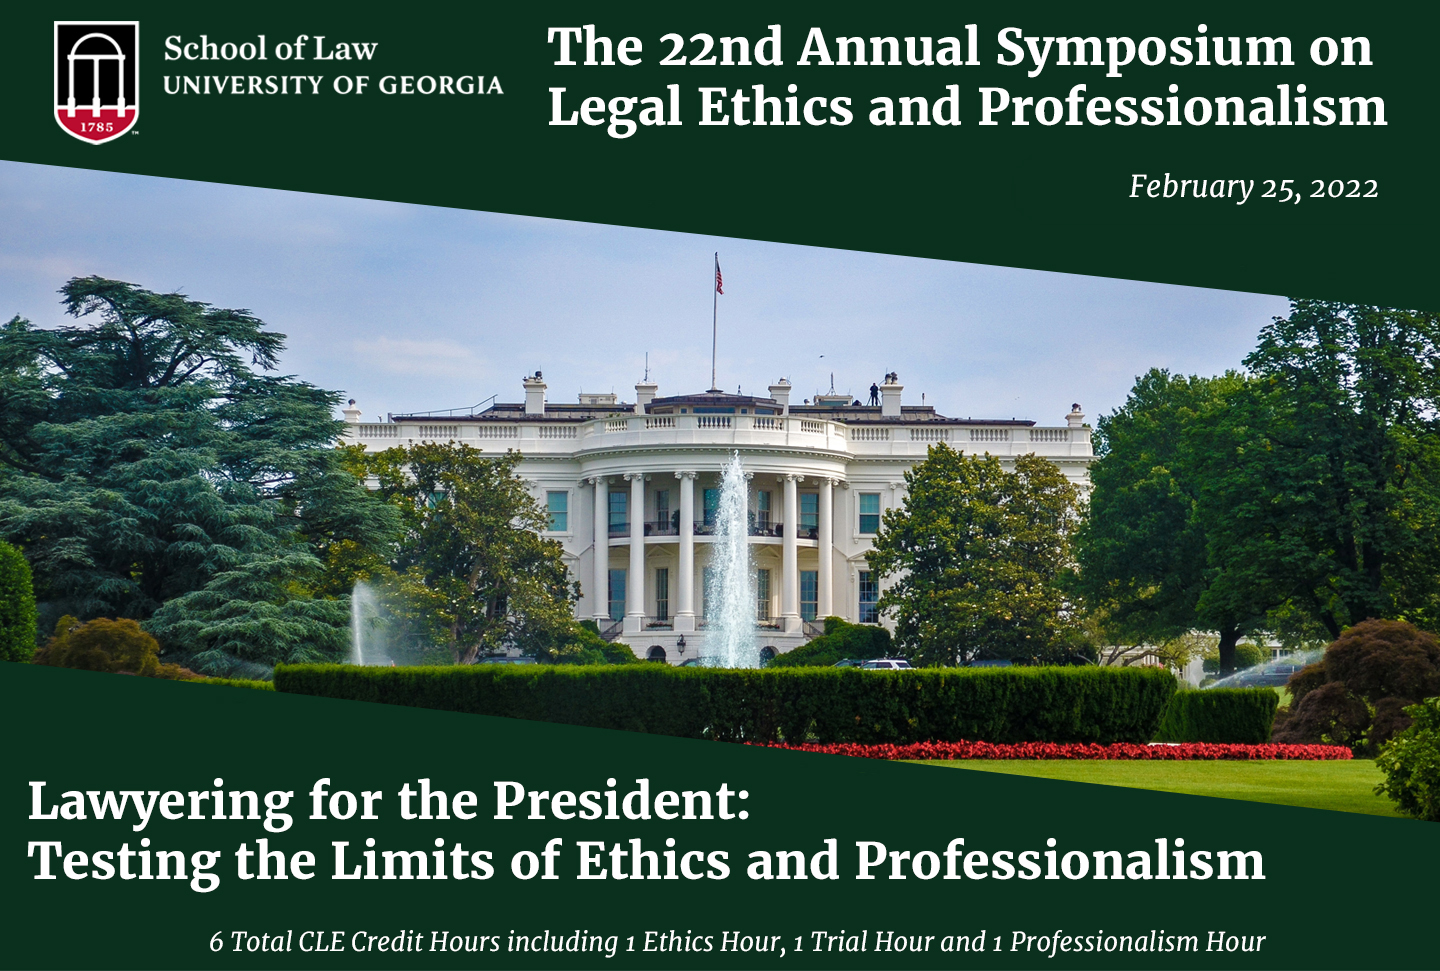 The 22nd Annual Symposium on Legal Ethics and Professionalism